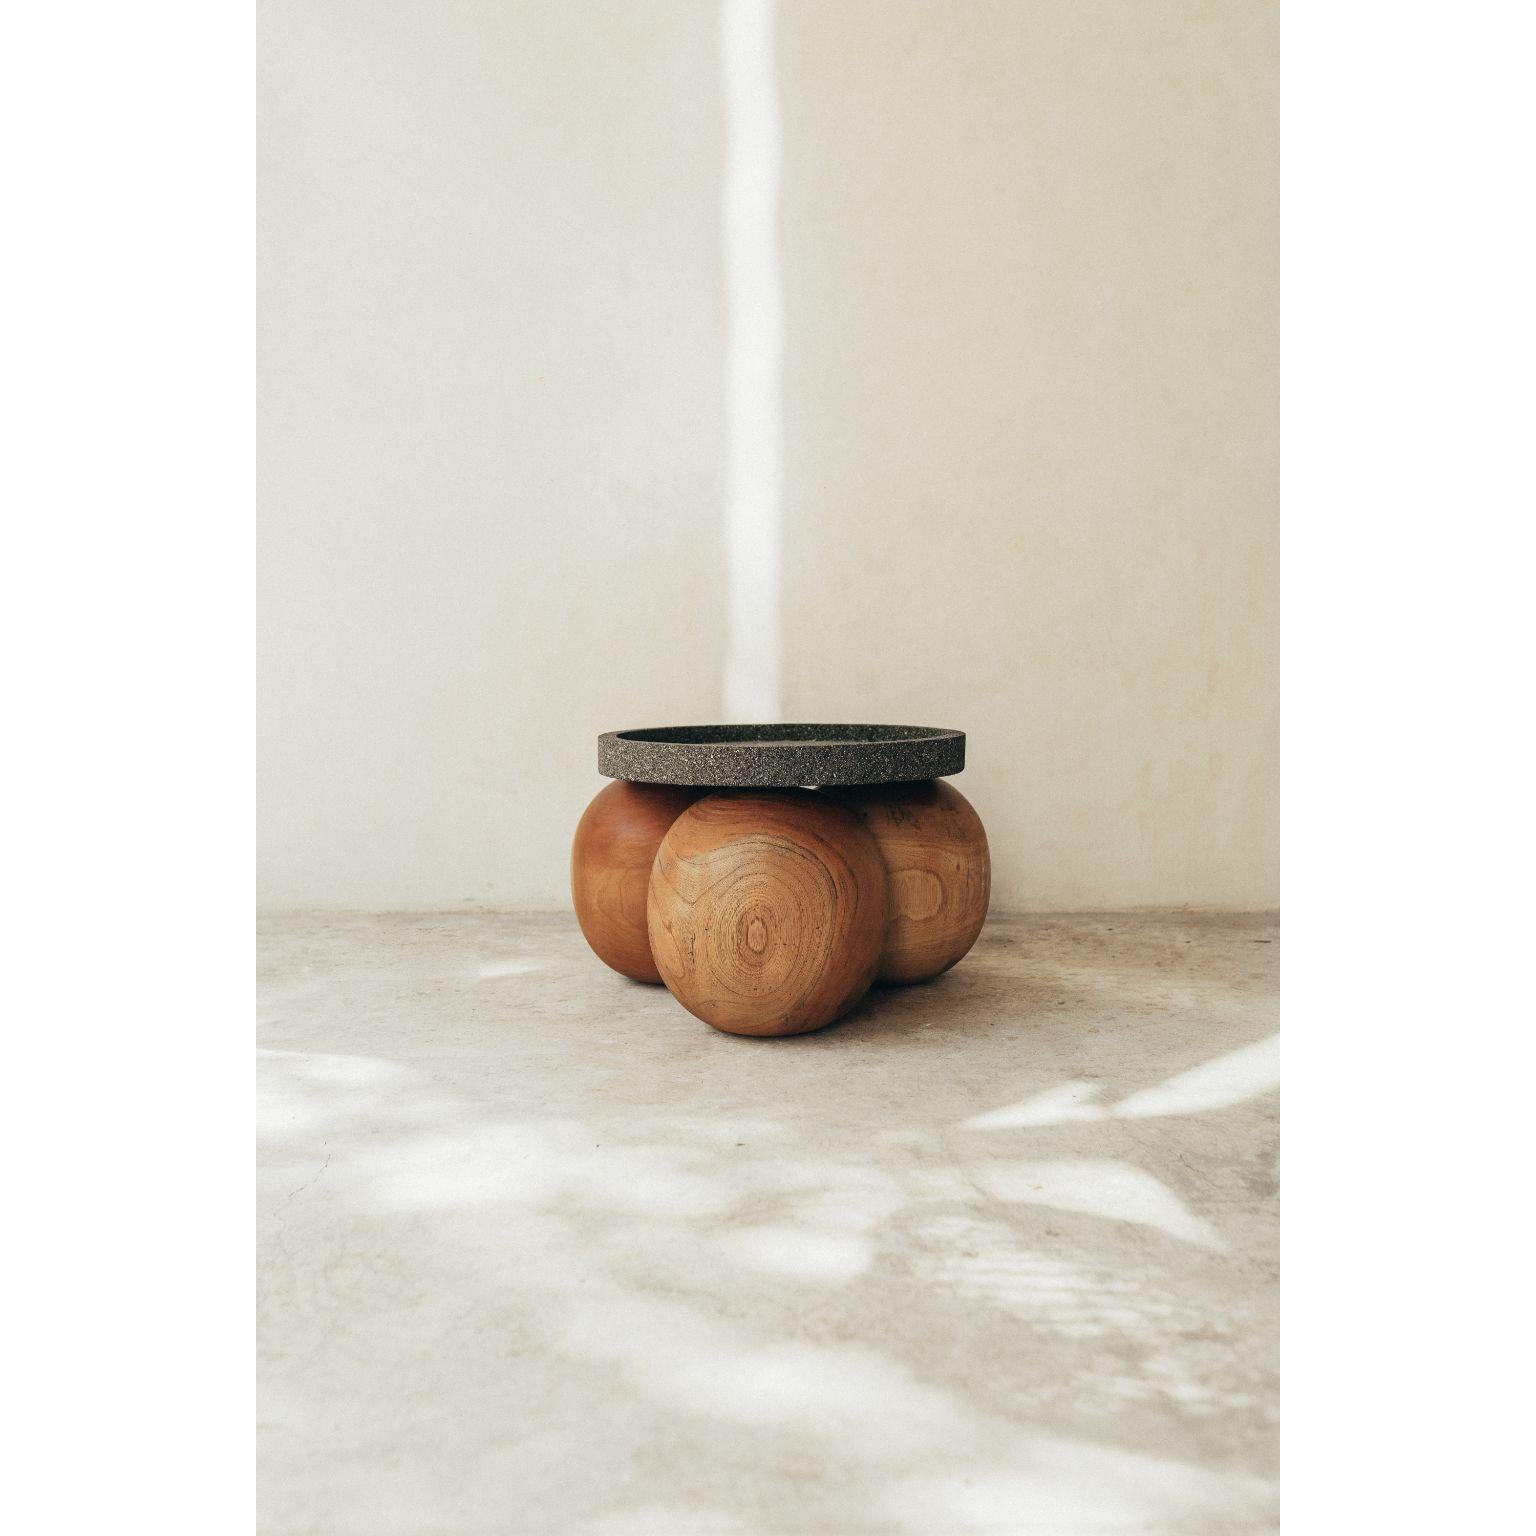 Natural Wooden Balls Table with Volcanic Stone Cover by Daniel Orozco For Sale 1